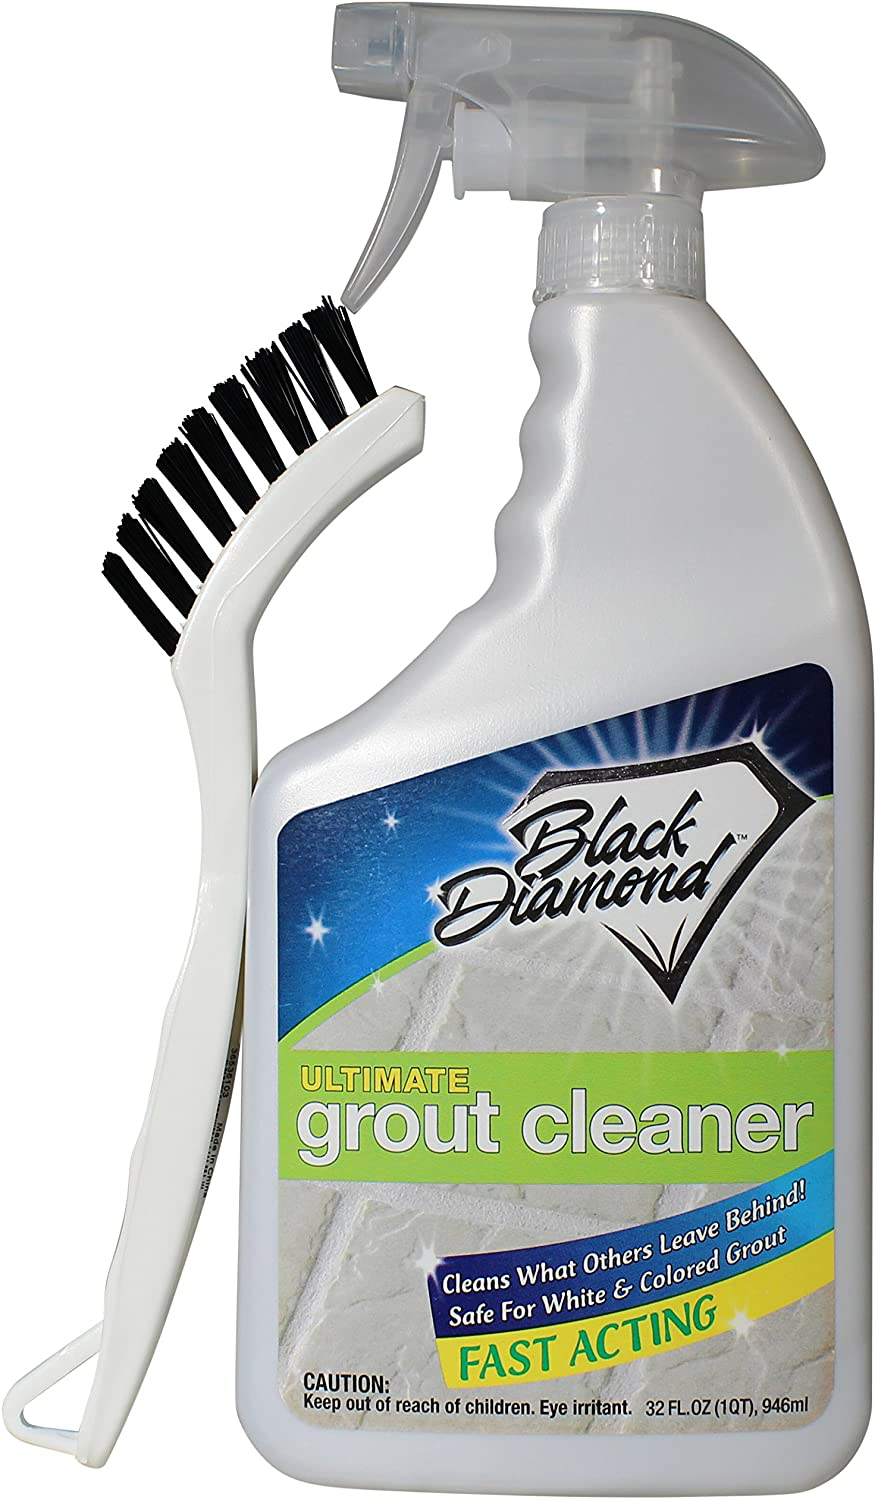 ULTIMATE GROUT CLEANER: Best Cleaner for Tile,Ceramic,Porcelain, Marble Acid-free Safe Deep Cleaner & Stain Remover for Even the Dirtiest Grout. (1-Quart/1-Brush)